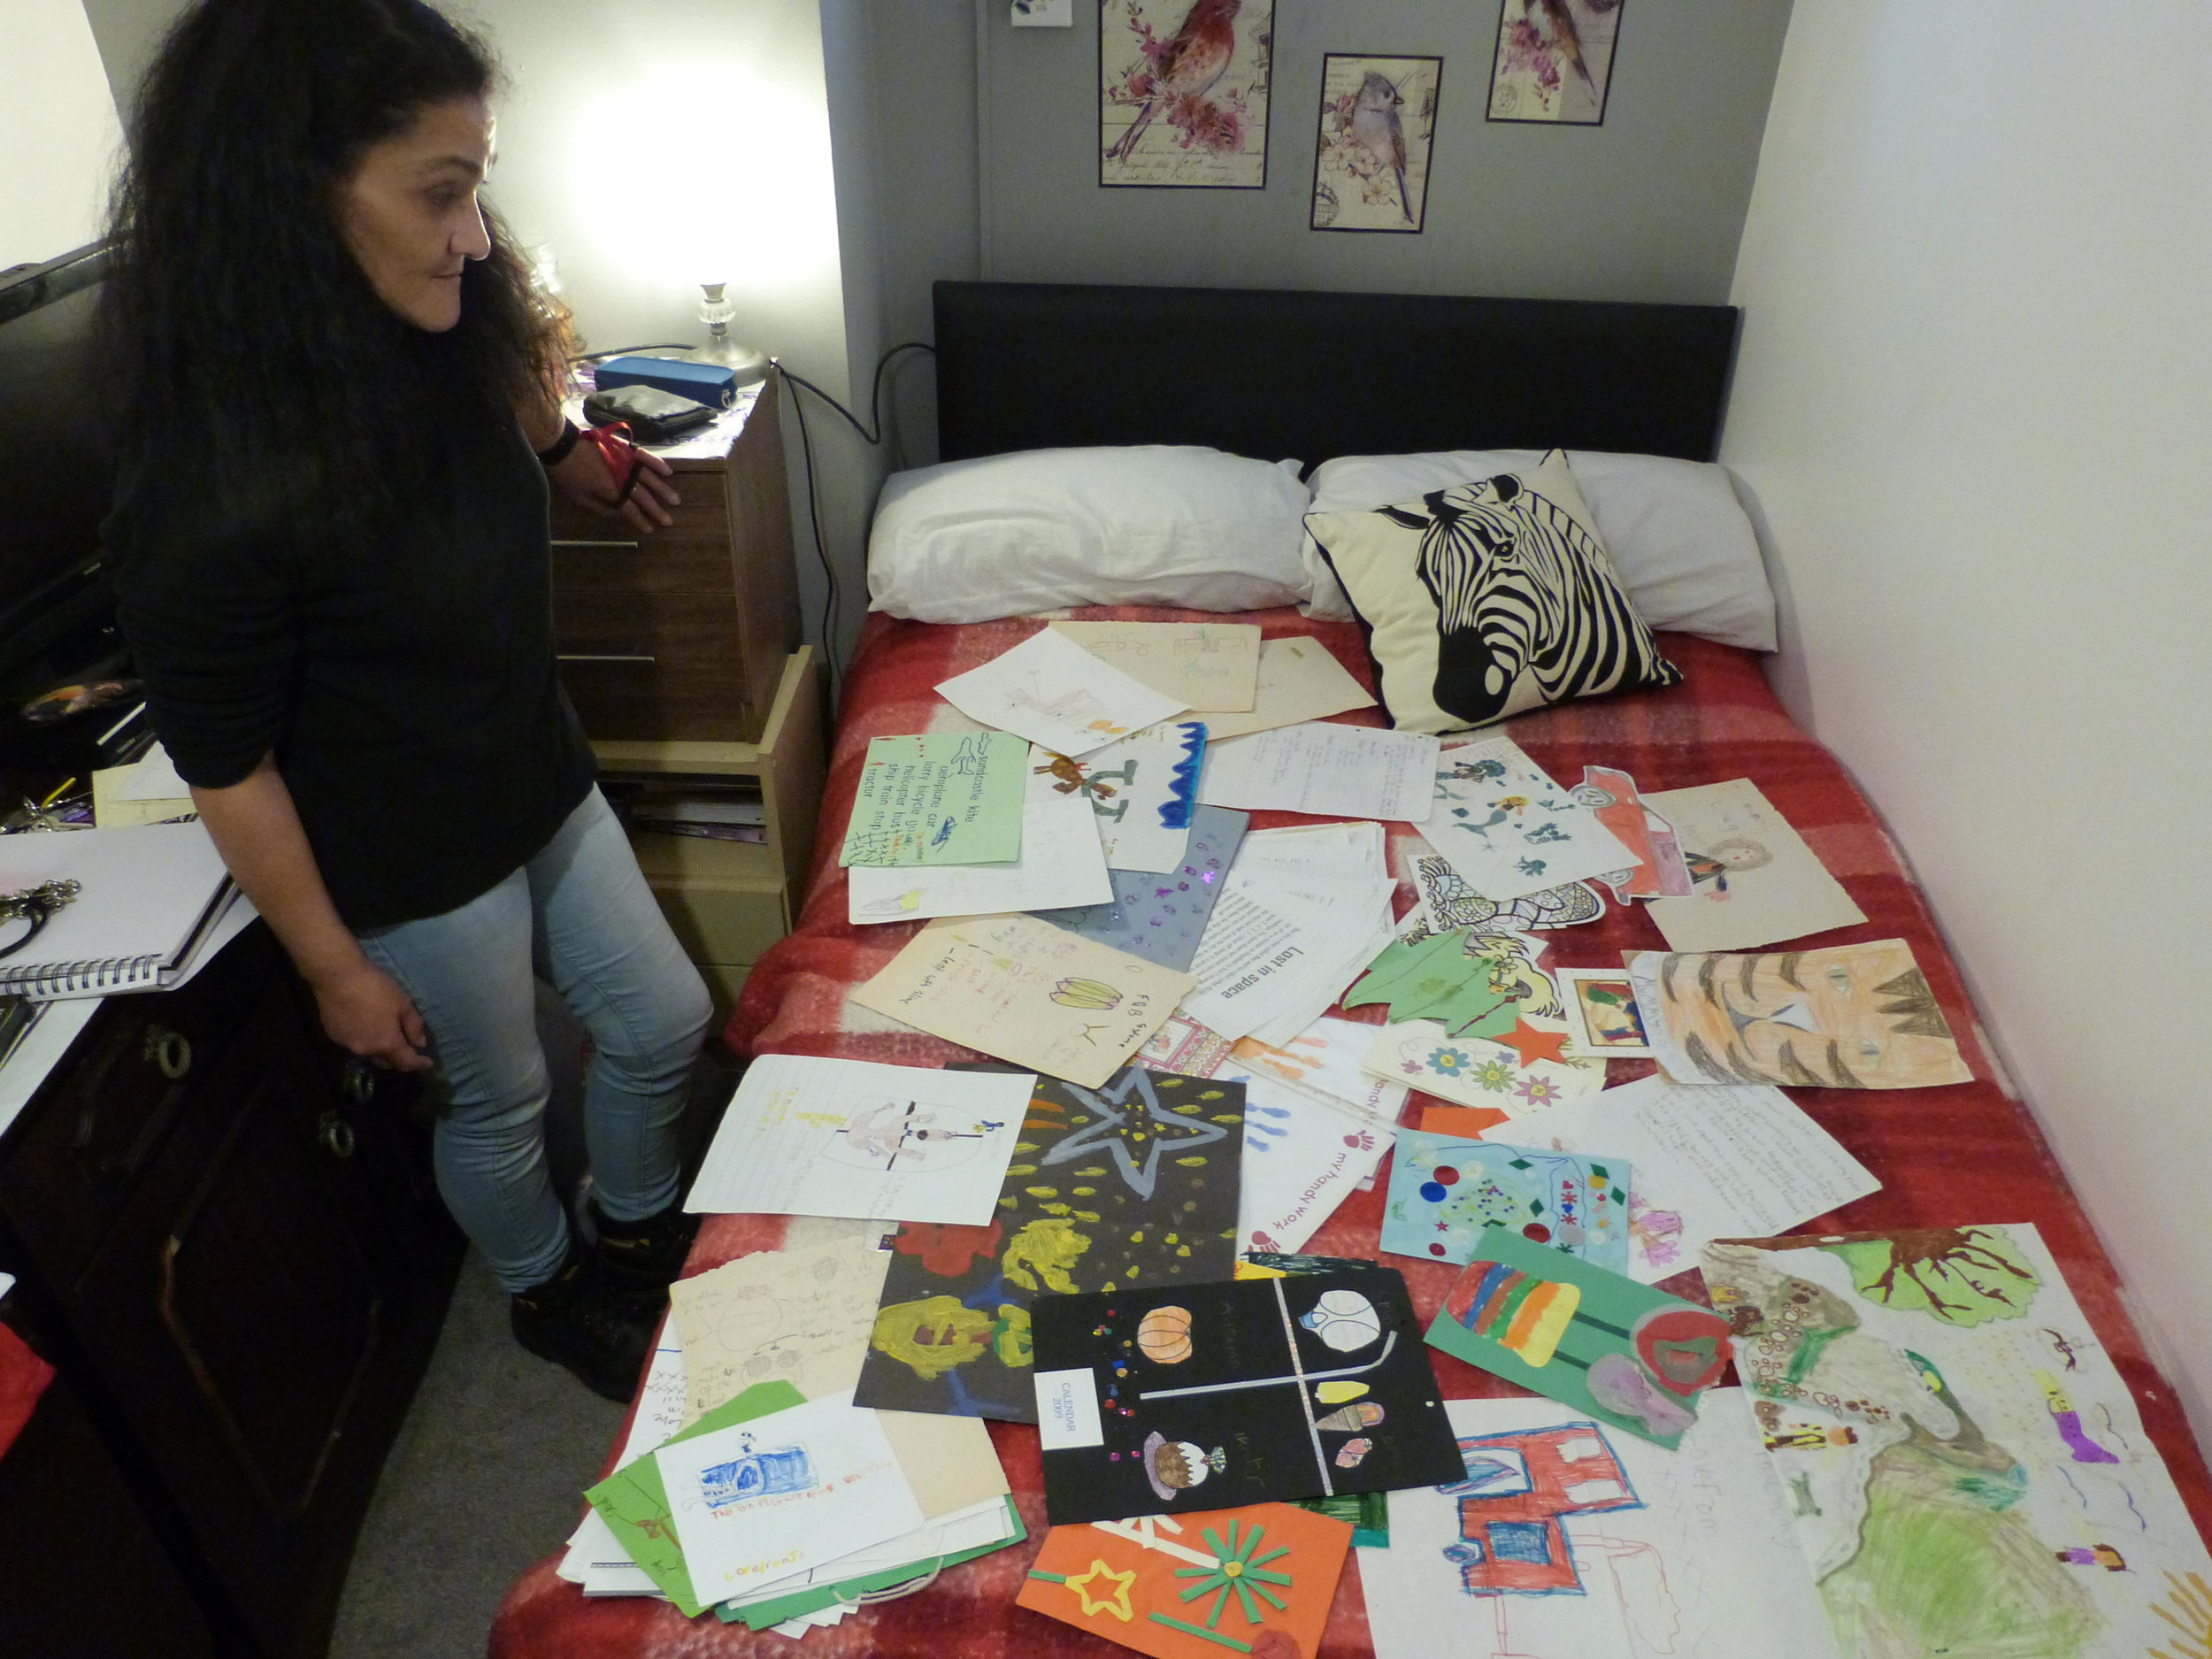 All the letters, cards and drawings Cookie received from her children and family while she was in prison